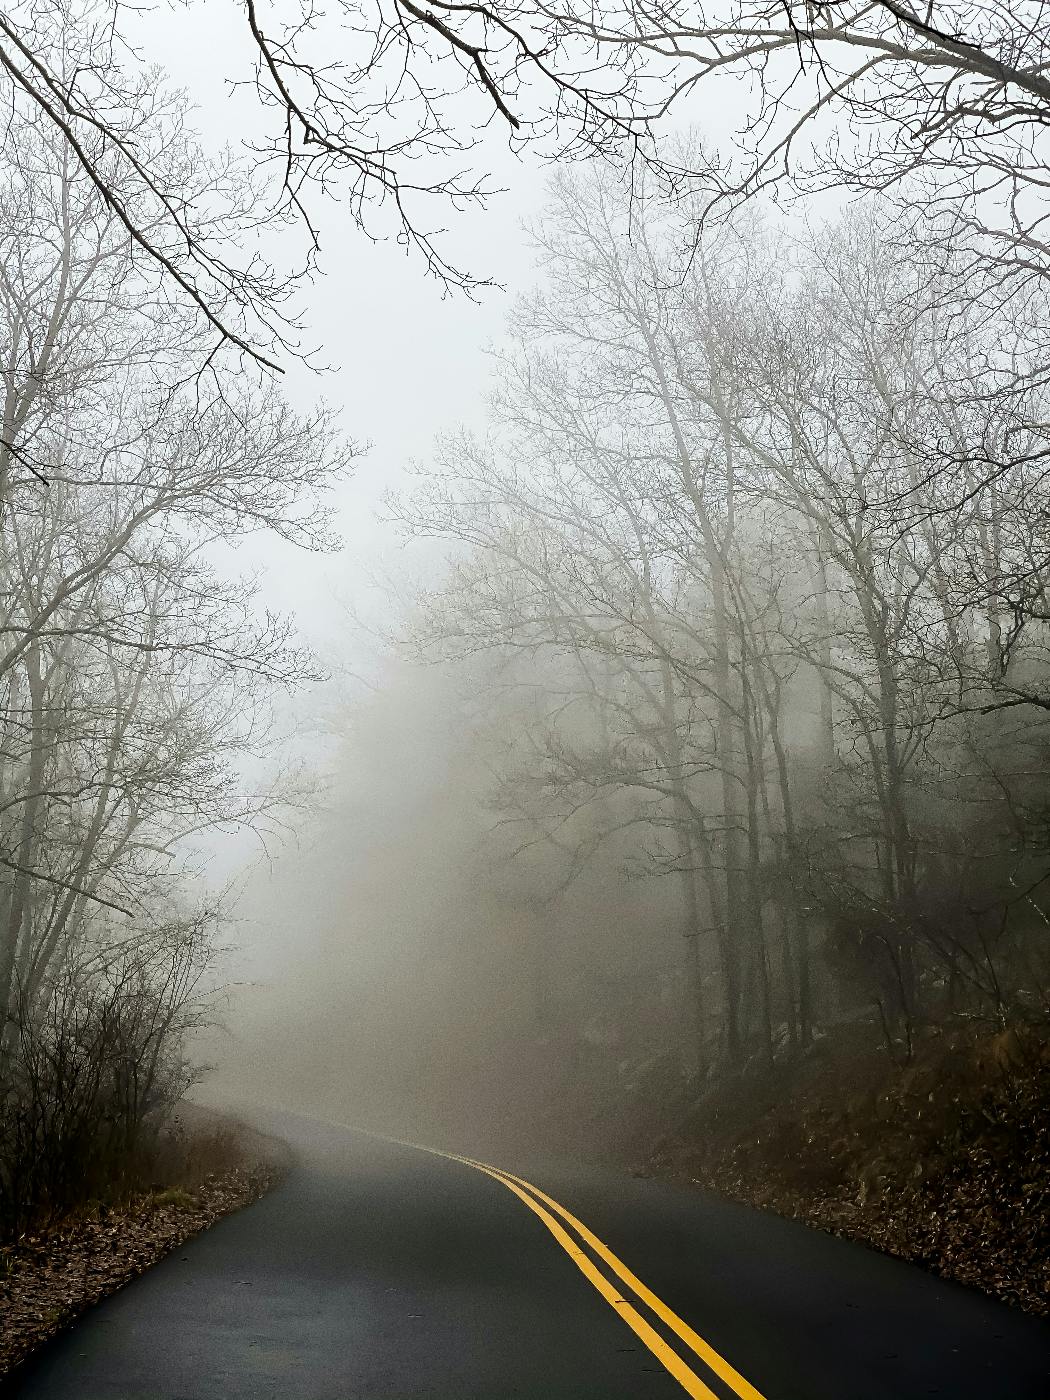 A paved road with bright yellow double lines gently curving off into a fog